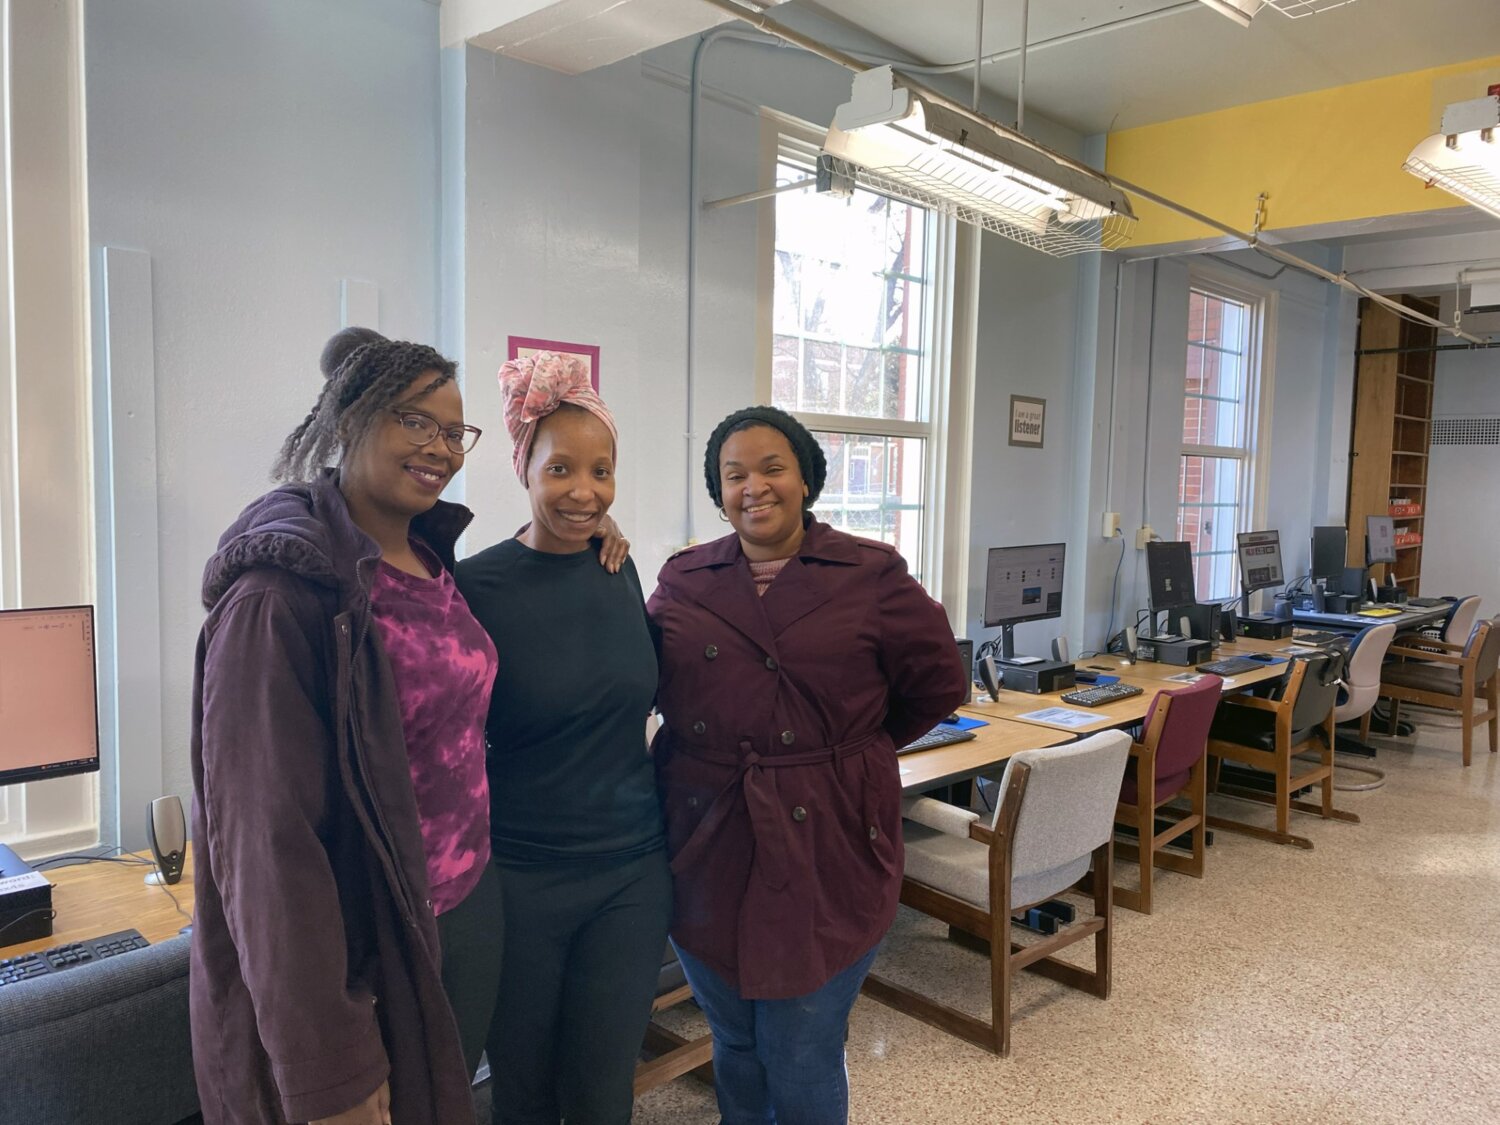 Jasmine Russell, center, poses in front of the new B.E.A.R. Academy computers with Director of Education and Training Tesshia Taylor, left, and Day Program Director Patricia Melgarejo.